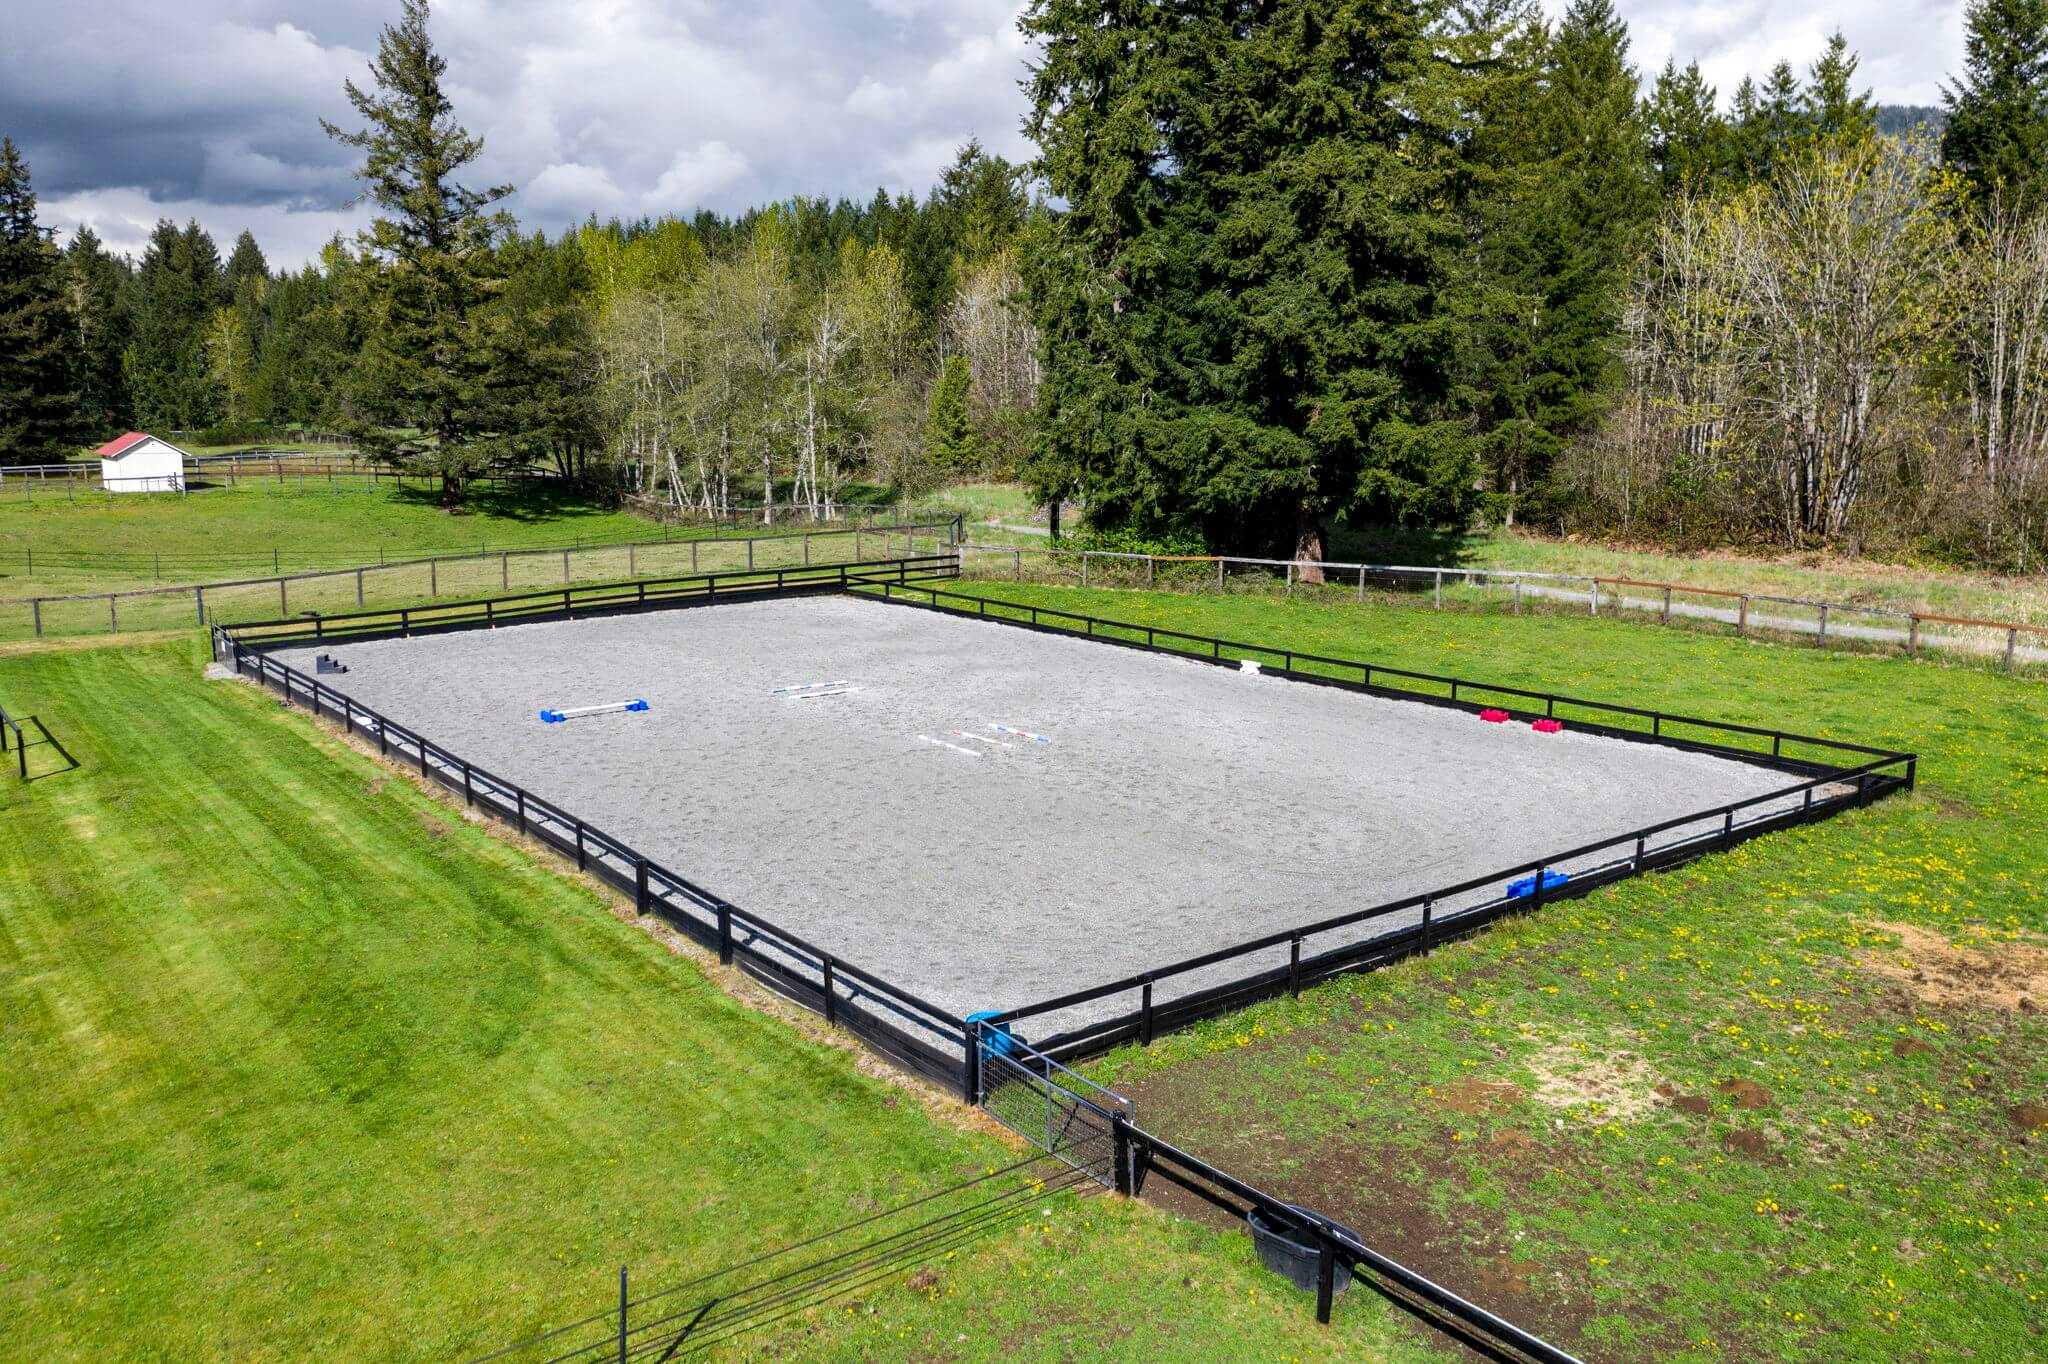 80' x 160' professionally leveled arena with all-weather custom blend footing of GGT felt, silicone and sand